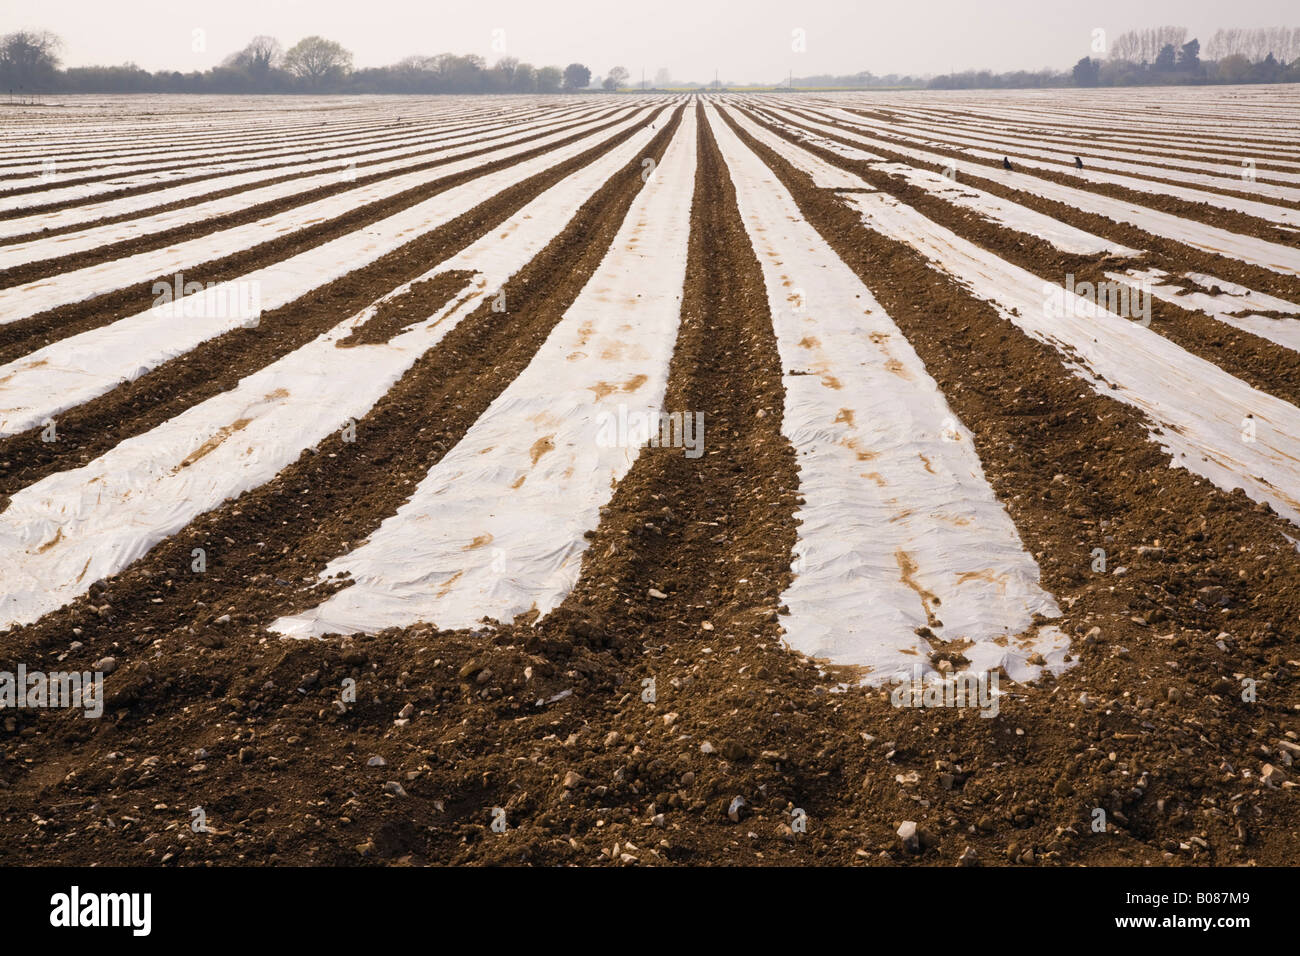 Lines of plastic cloche sheeting on arable crop in field West Sussex England UK Stock Photo